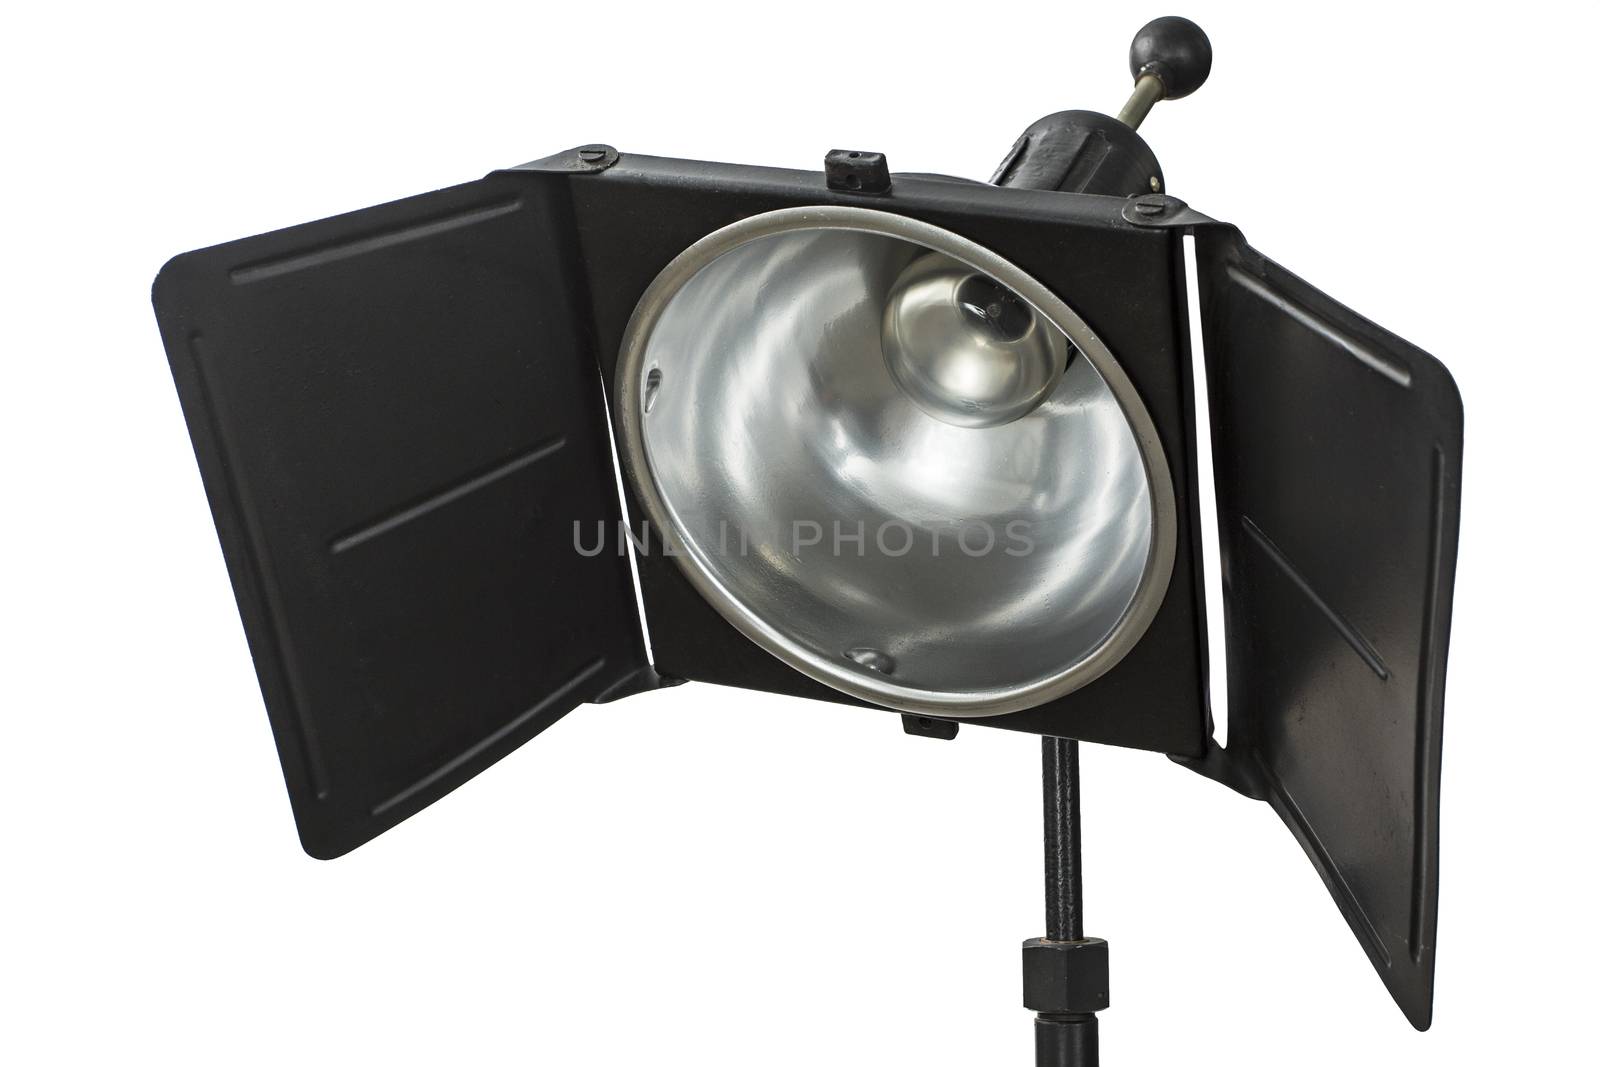 Photo studio lighting equipment, isolated on white, with clipping path